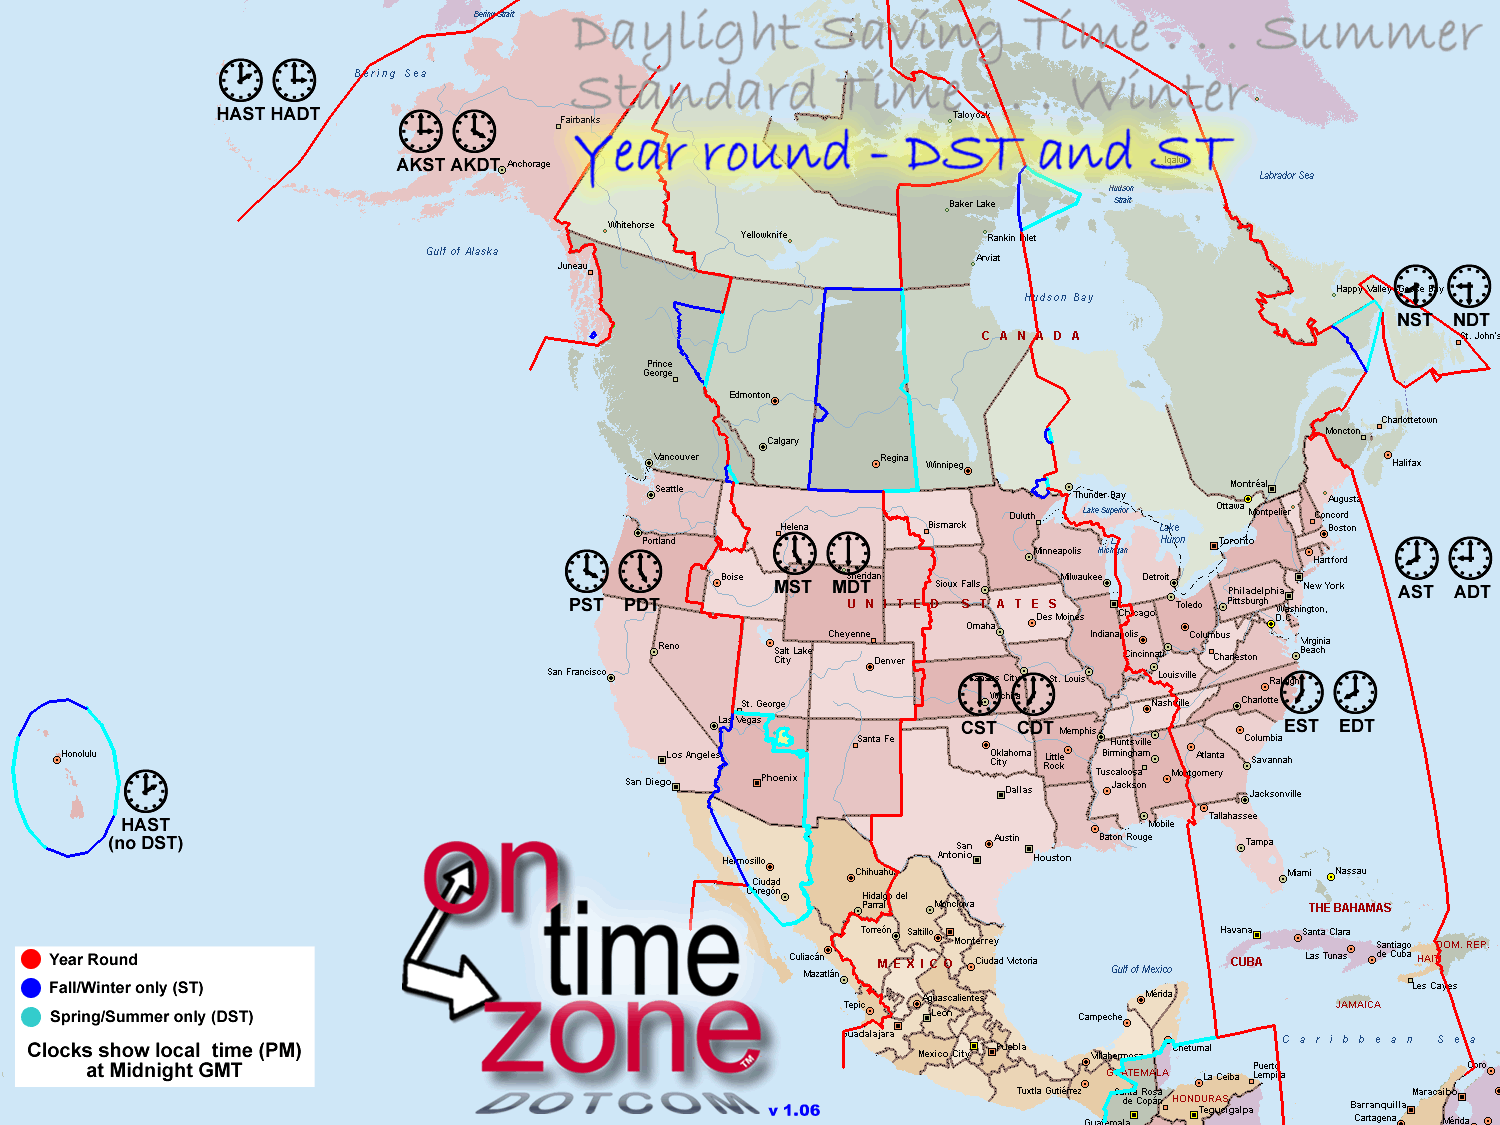 florida and new york time zone